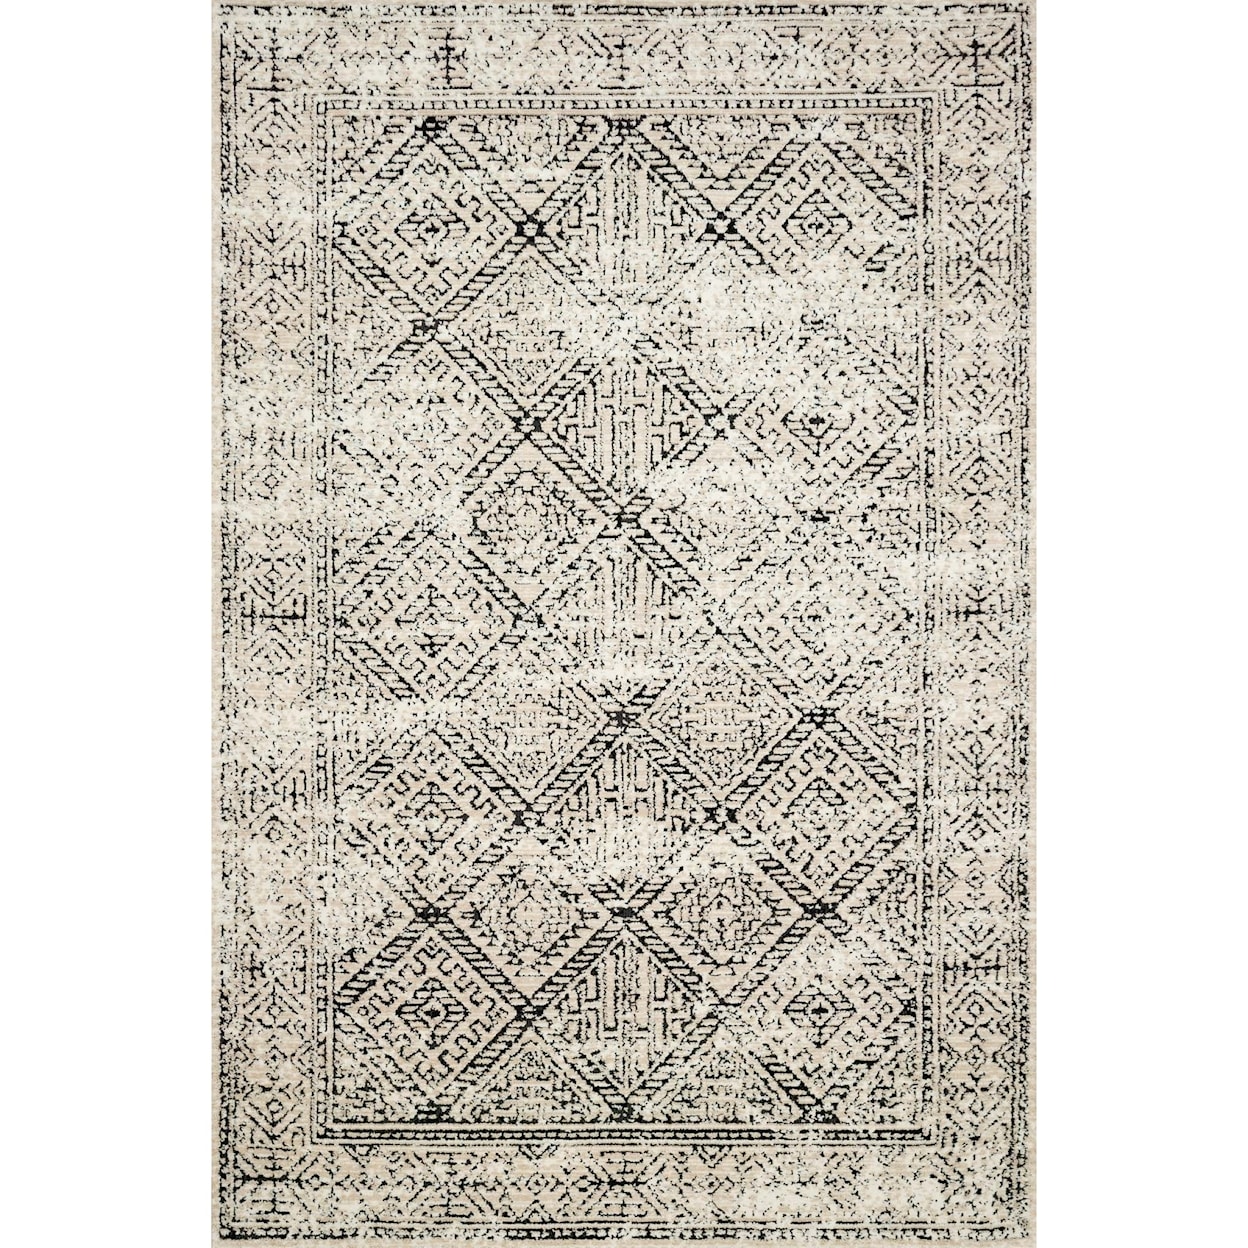 Magnolia Home by Joanna Gaines for Loloi Lotus 3'-6" x 5'-6" Rug